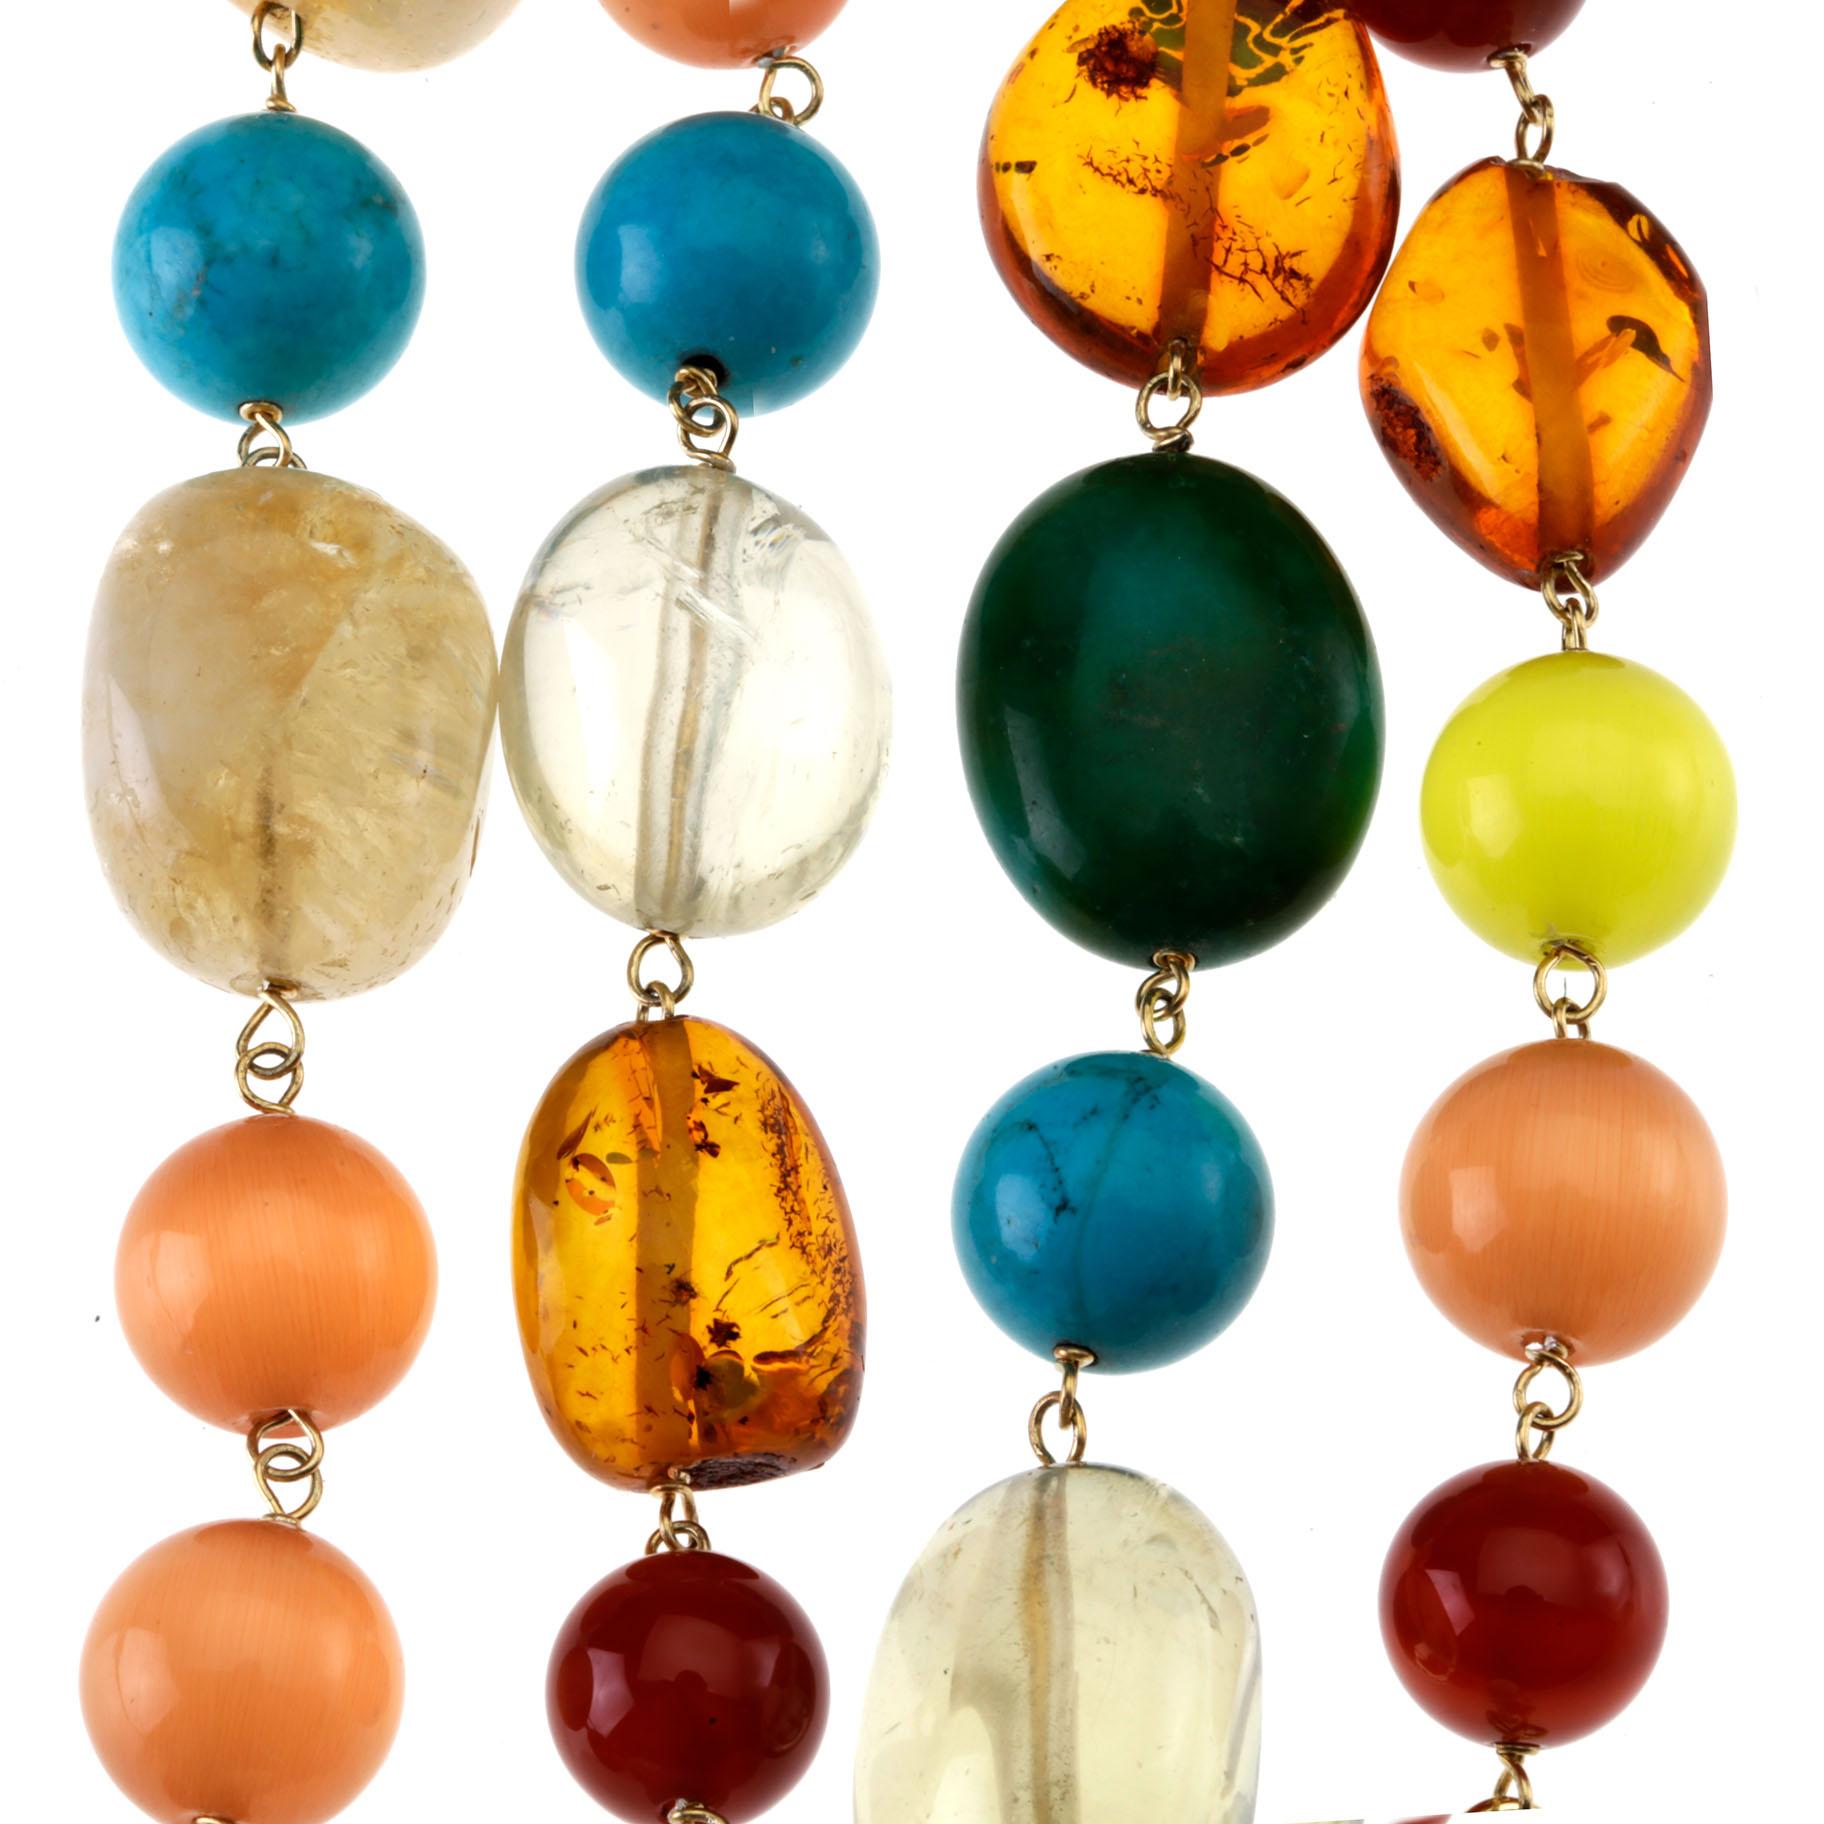 Amber, Citrine, Turquoise, Amber, Carnelian, Opal, Amethyst  Vermeille Necklace, length 80 cm.
All Giulia Colussi jewelry is new and has never been previously owned or worn. Each item will arrive at your door beautifully gift wrapped in our boxes,